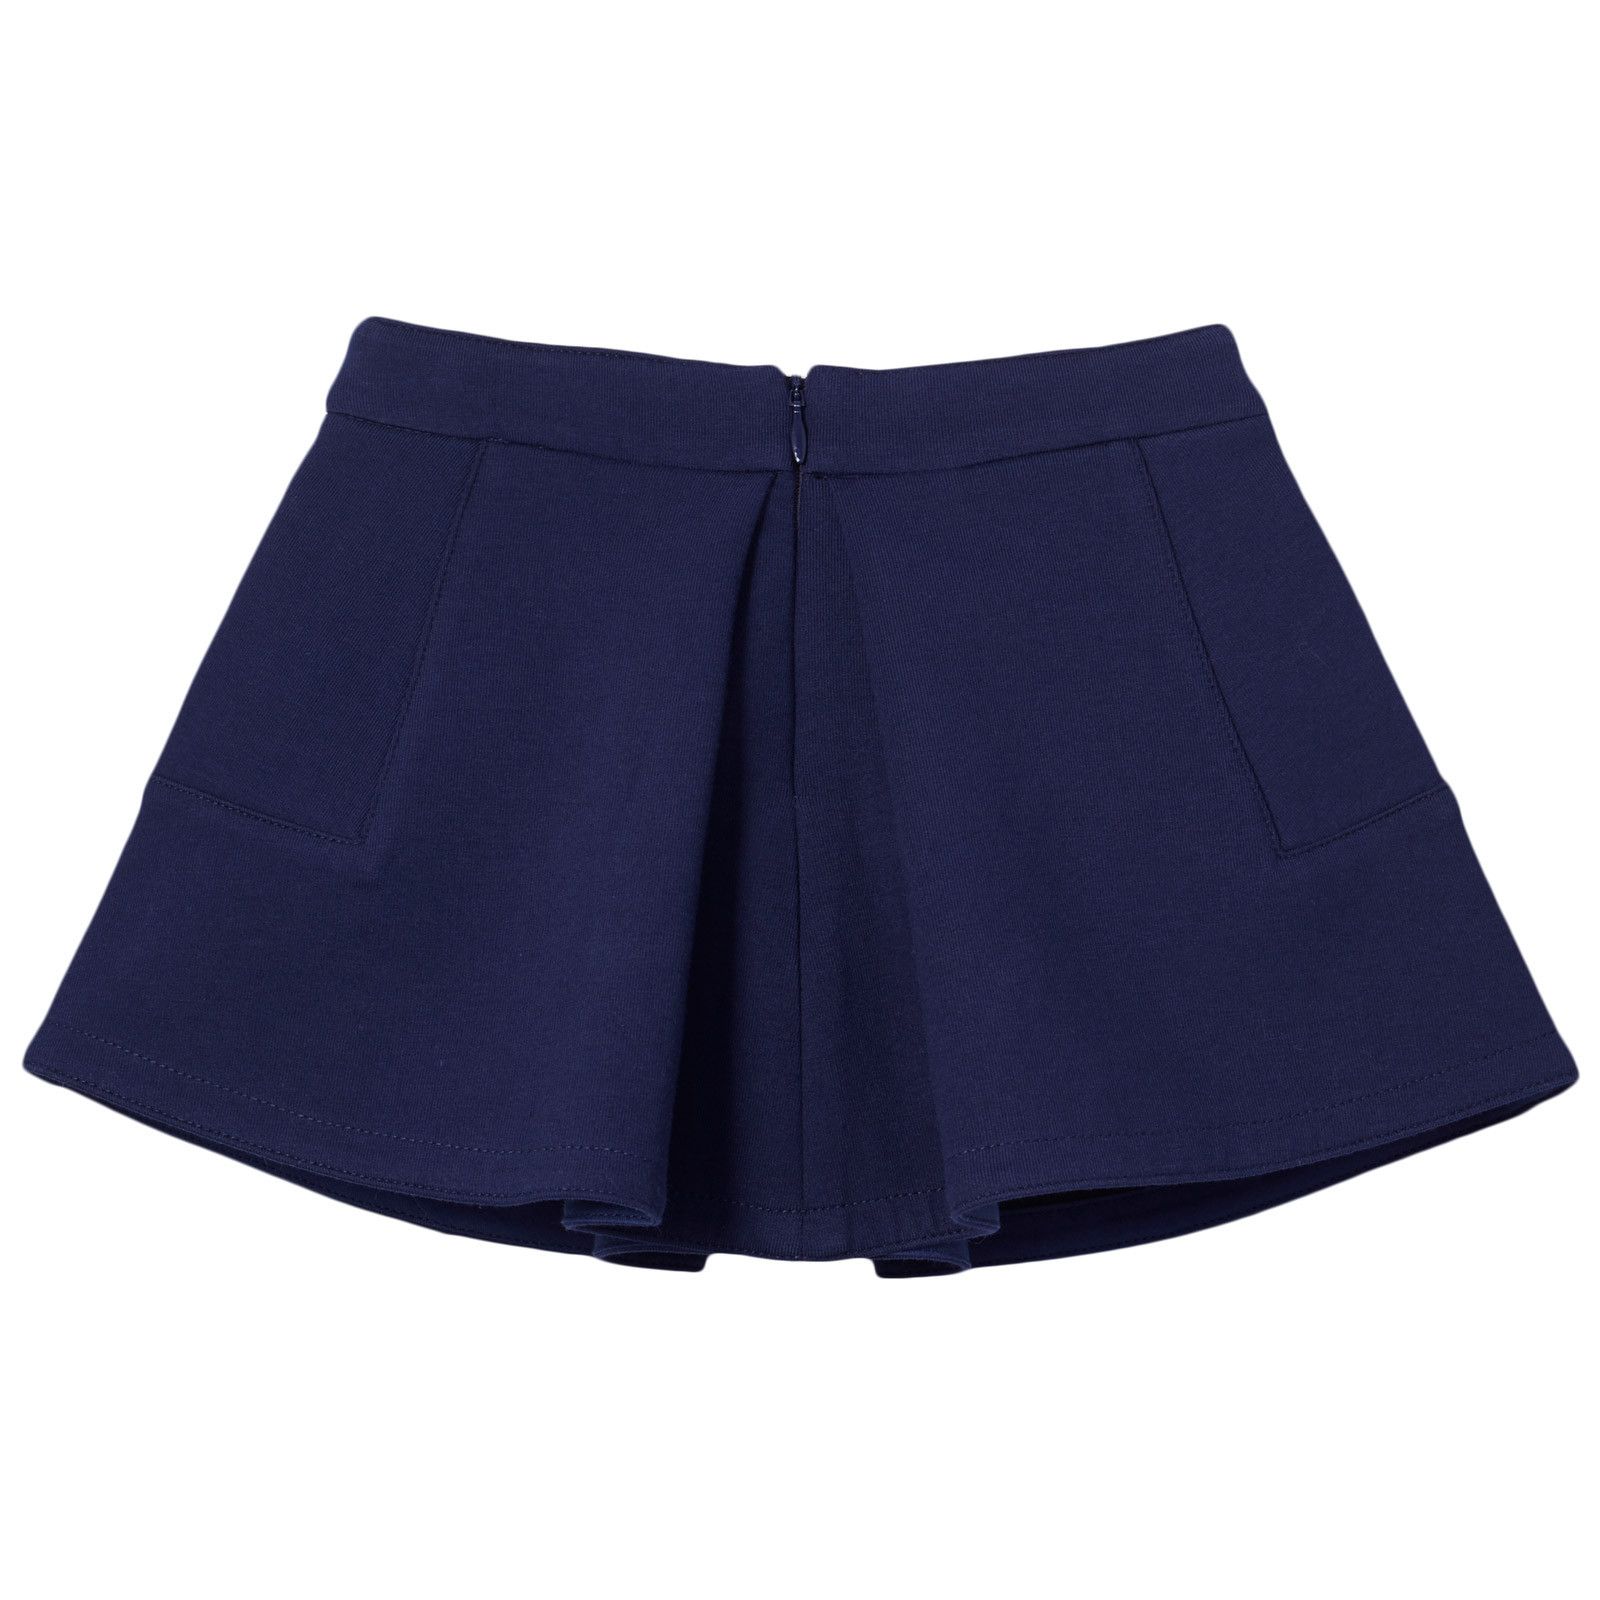 Girls Navy Blue Embroidered Logo Skirt With Pockets - CÉMAROSE | Children's Fashion Store - 2